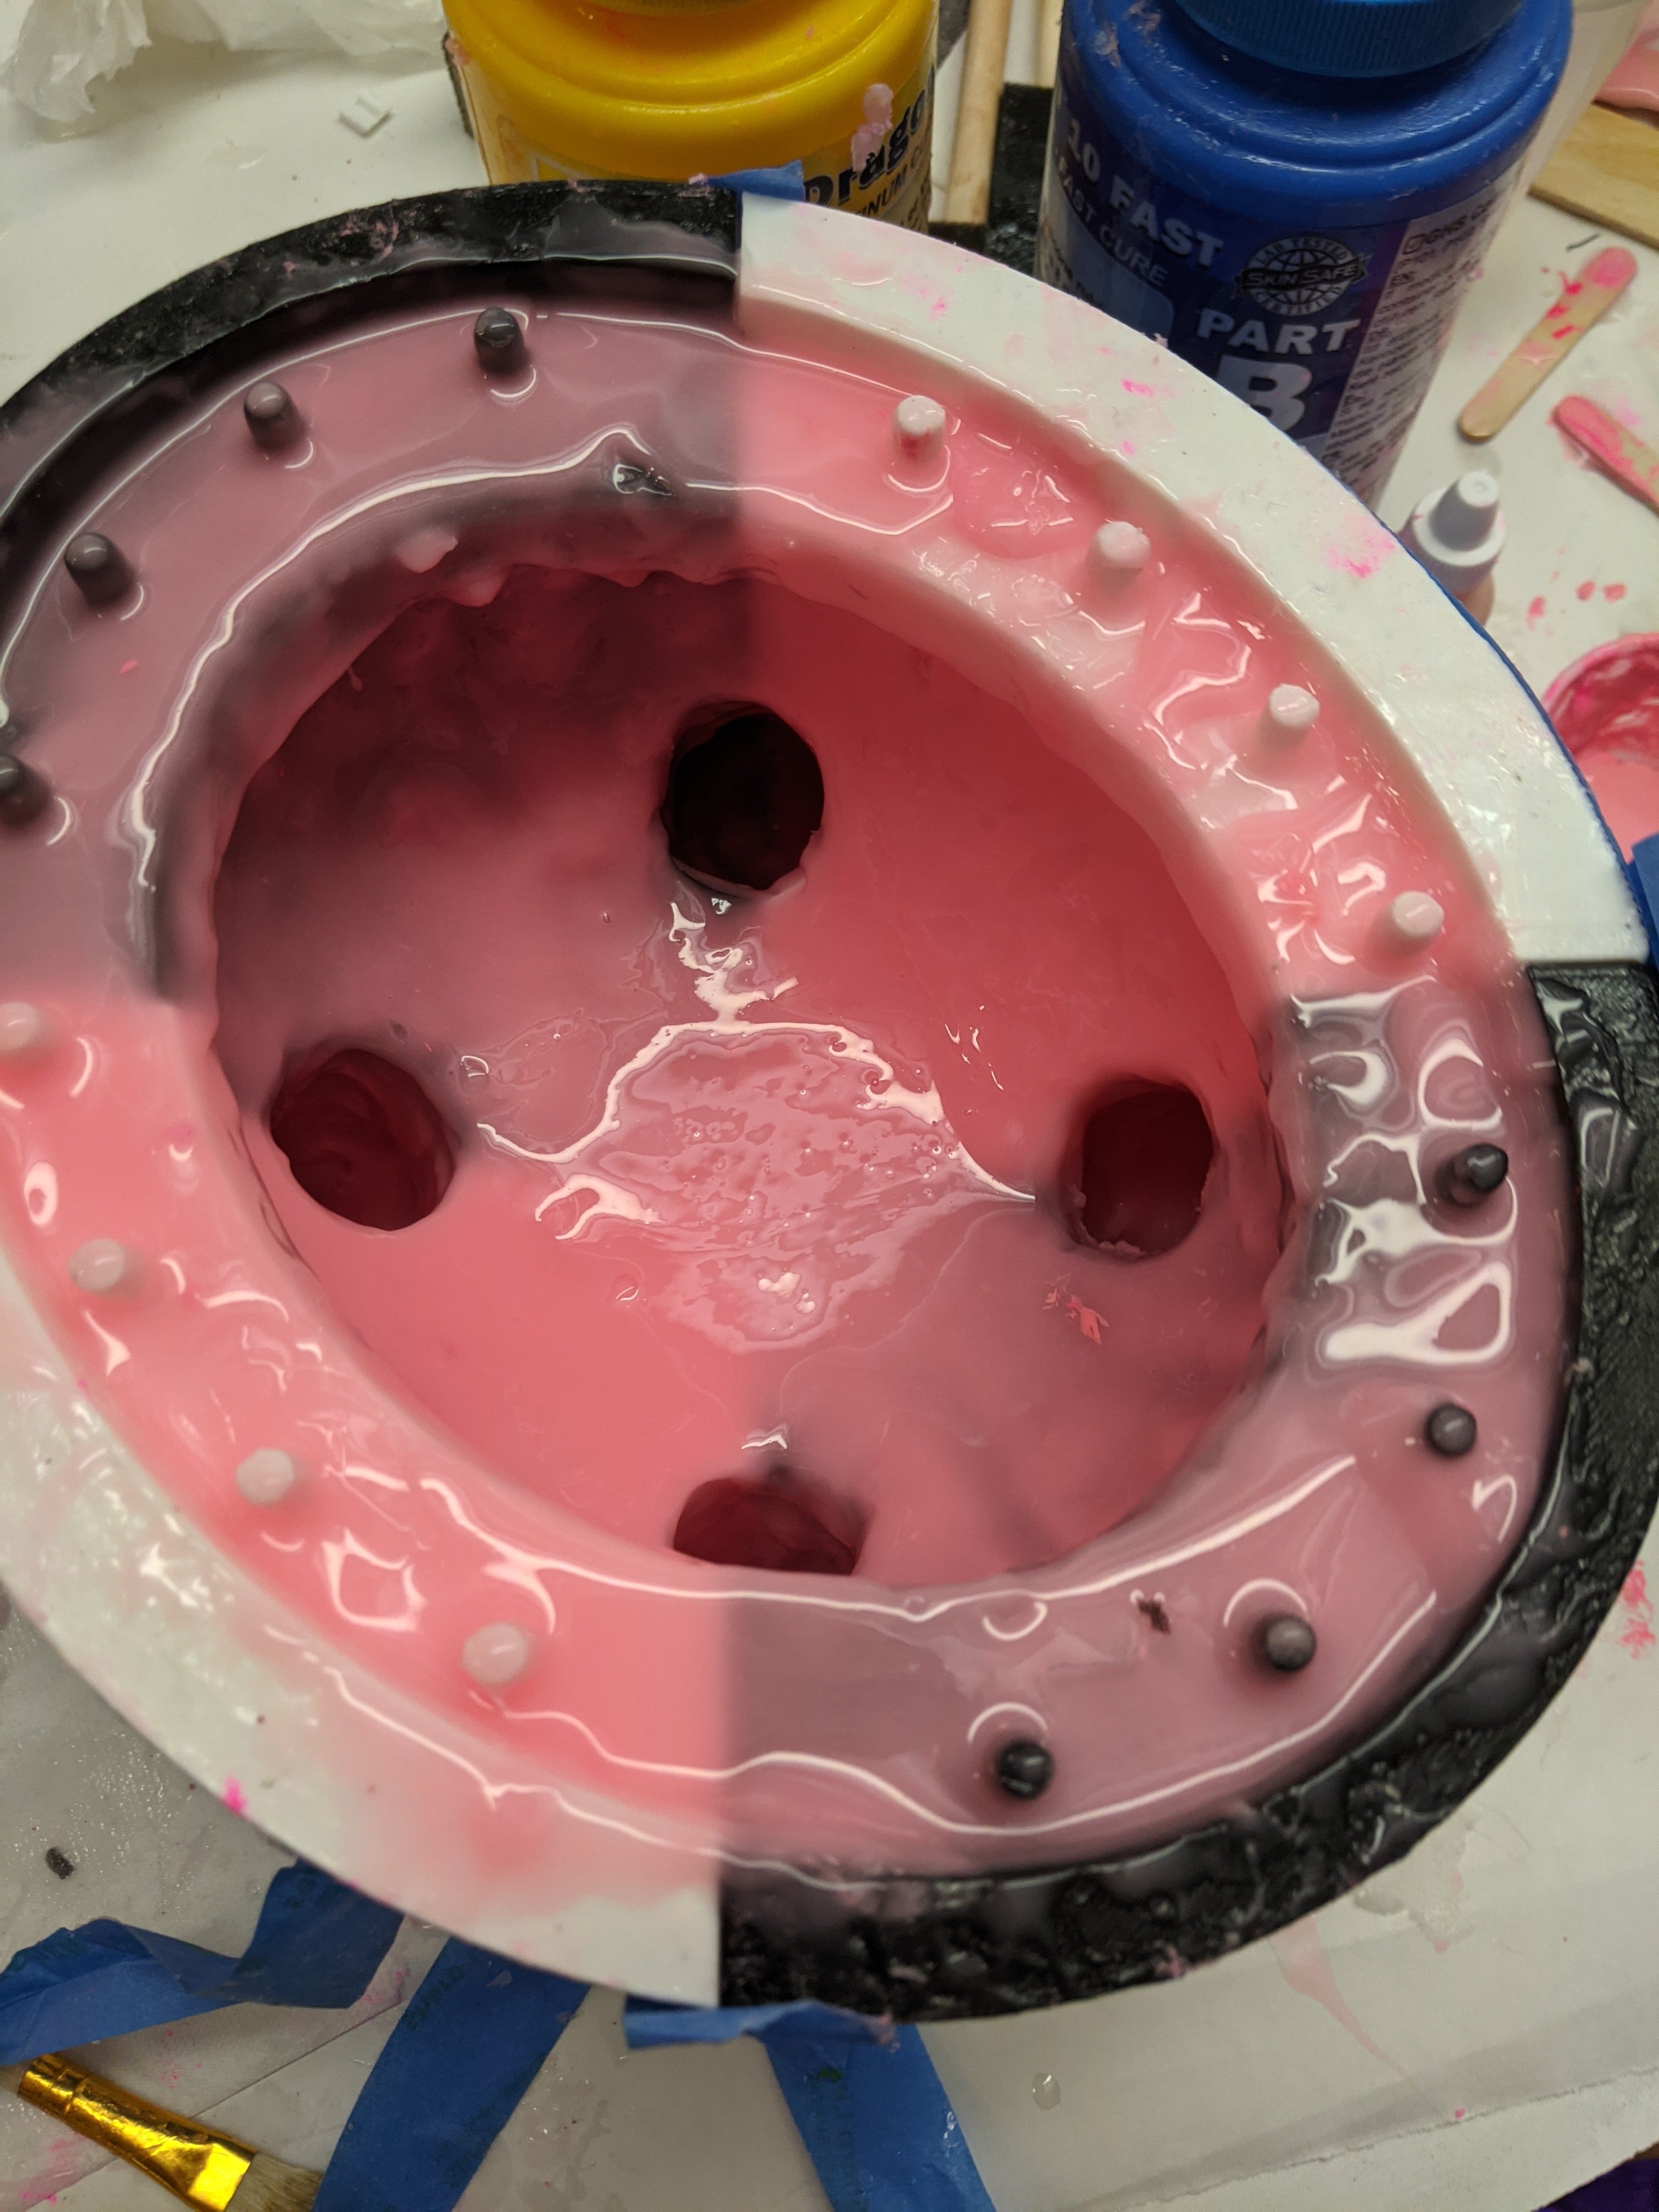 Grotesque photo of the udder mold box coated in gooey pink silicone